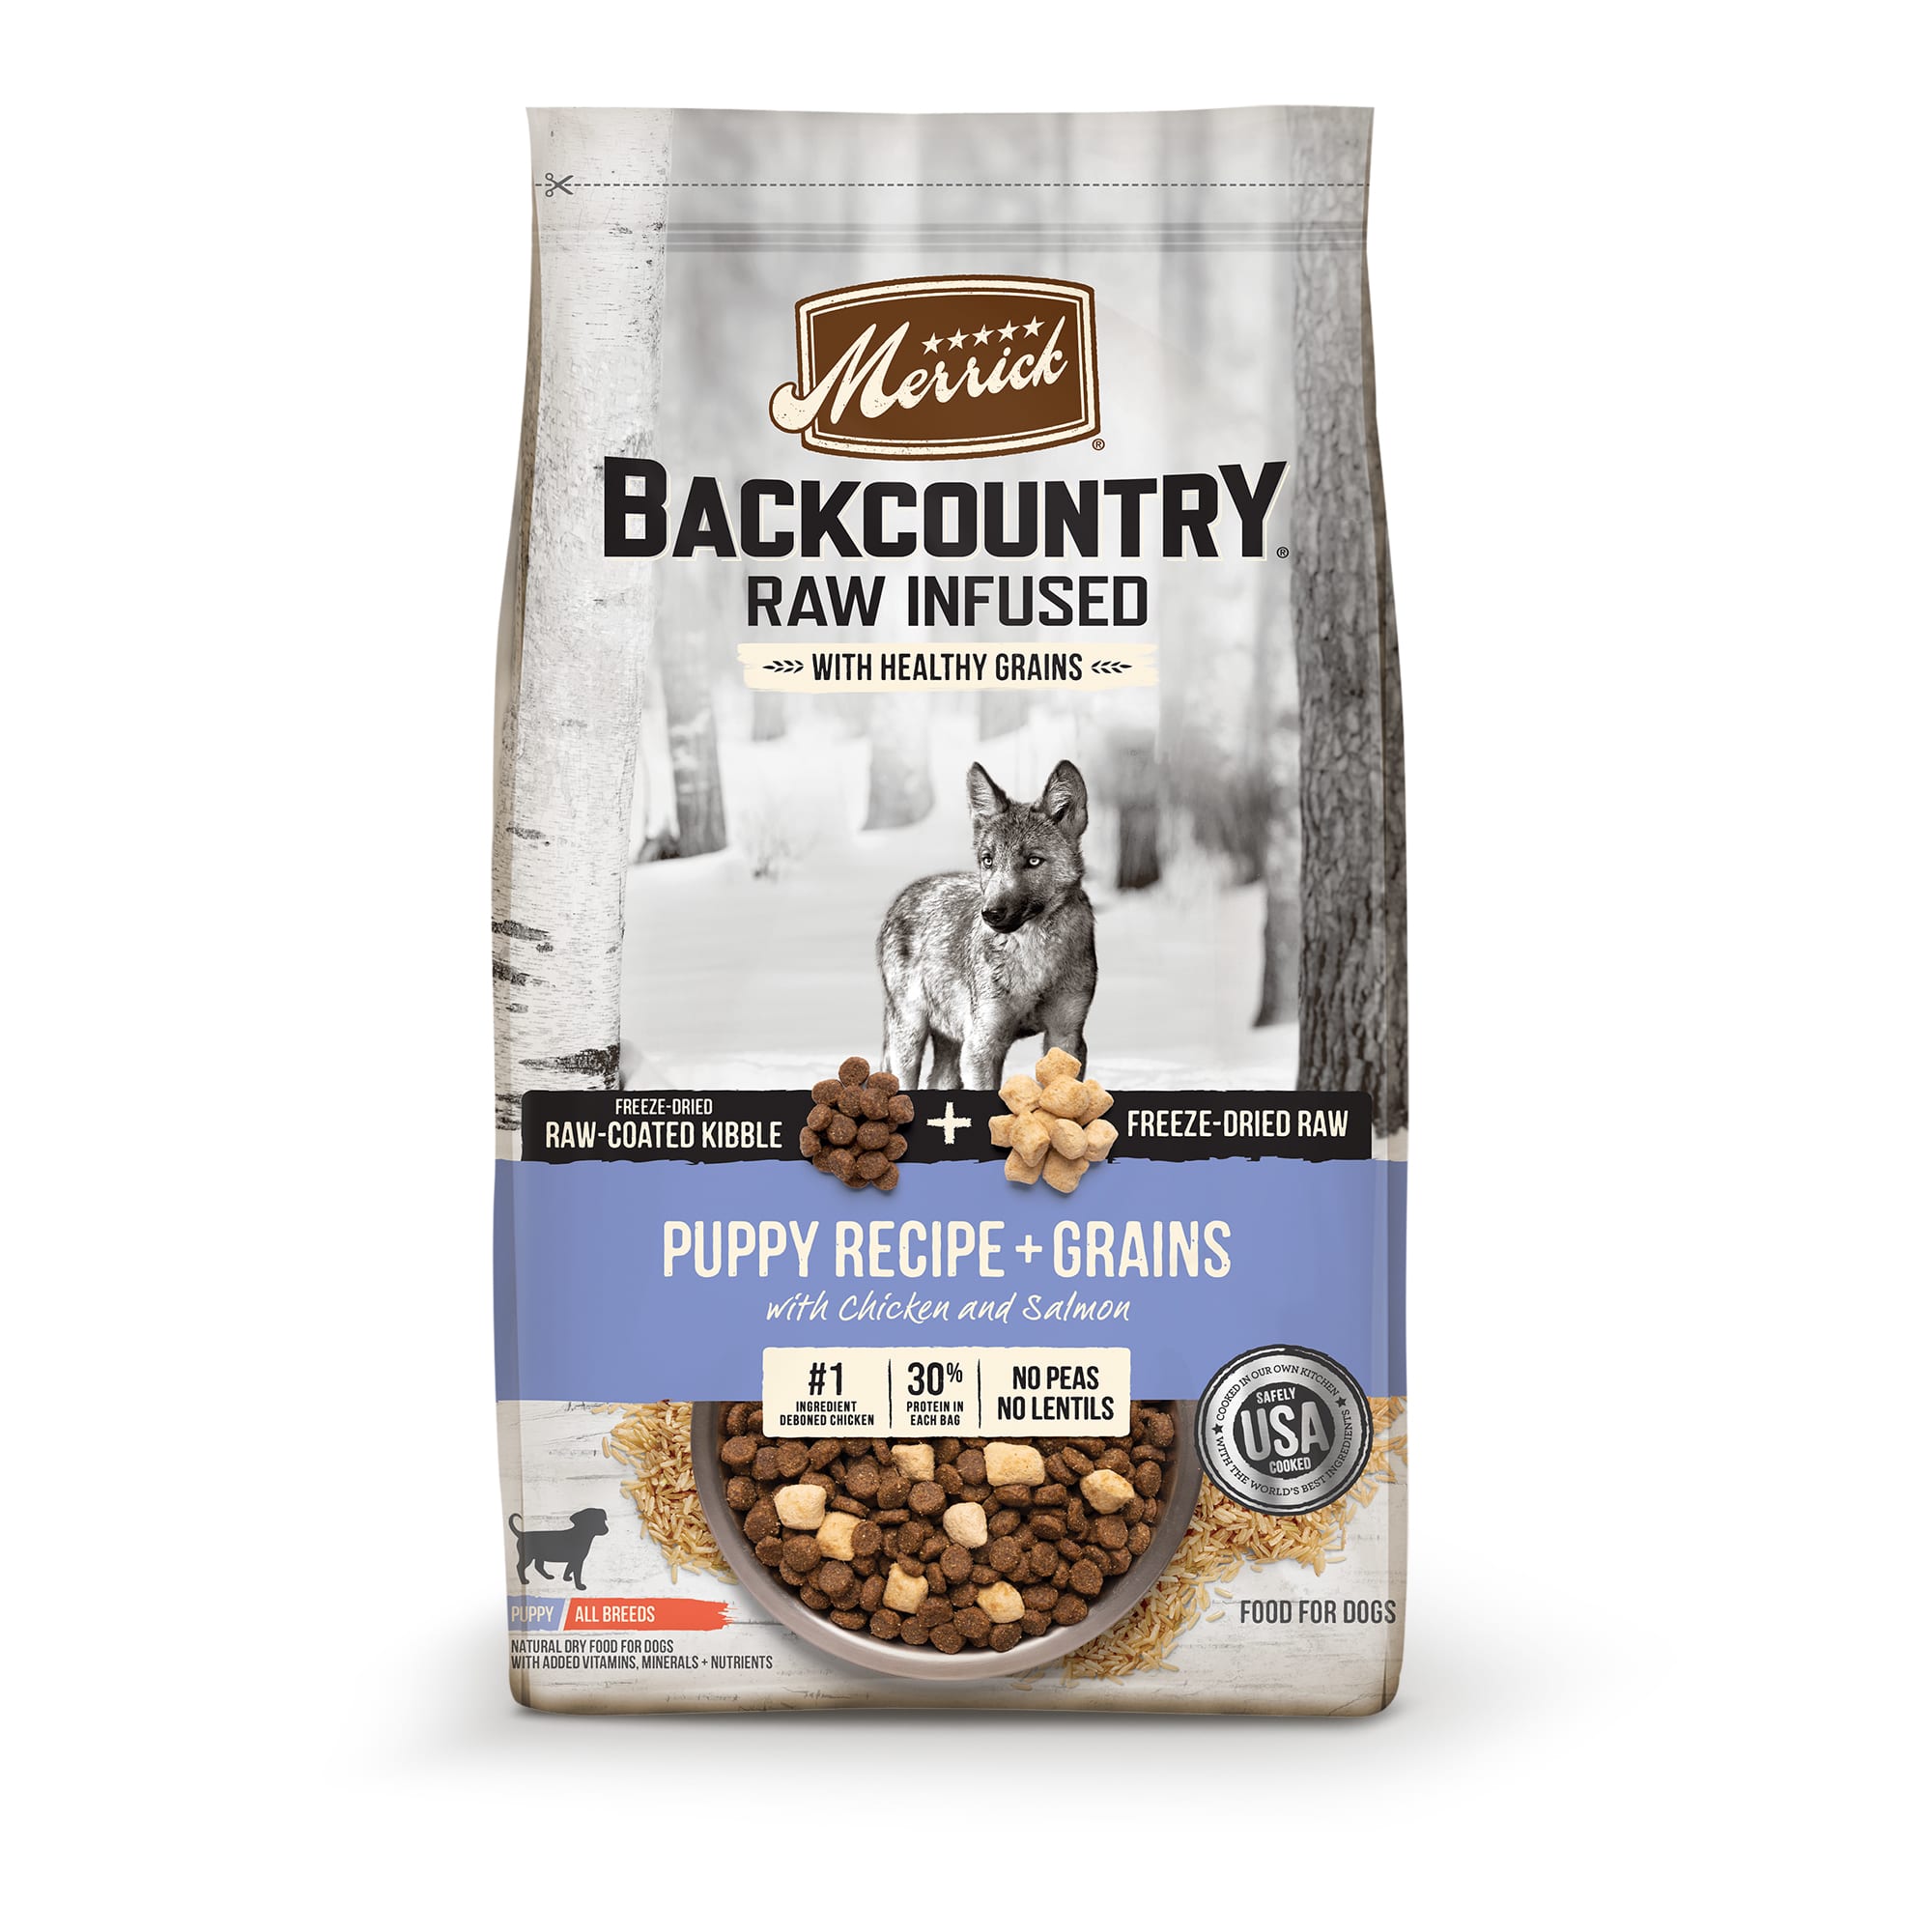 Merrick Backcountry High Protein FreezeDried Puppy Recipe Dry Dog Food